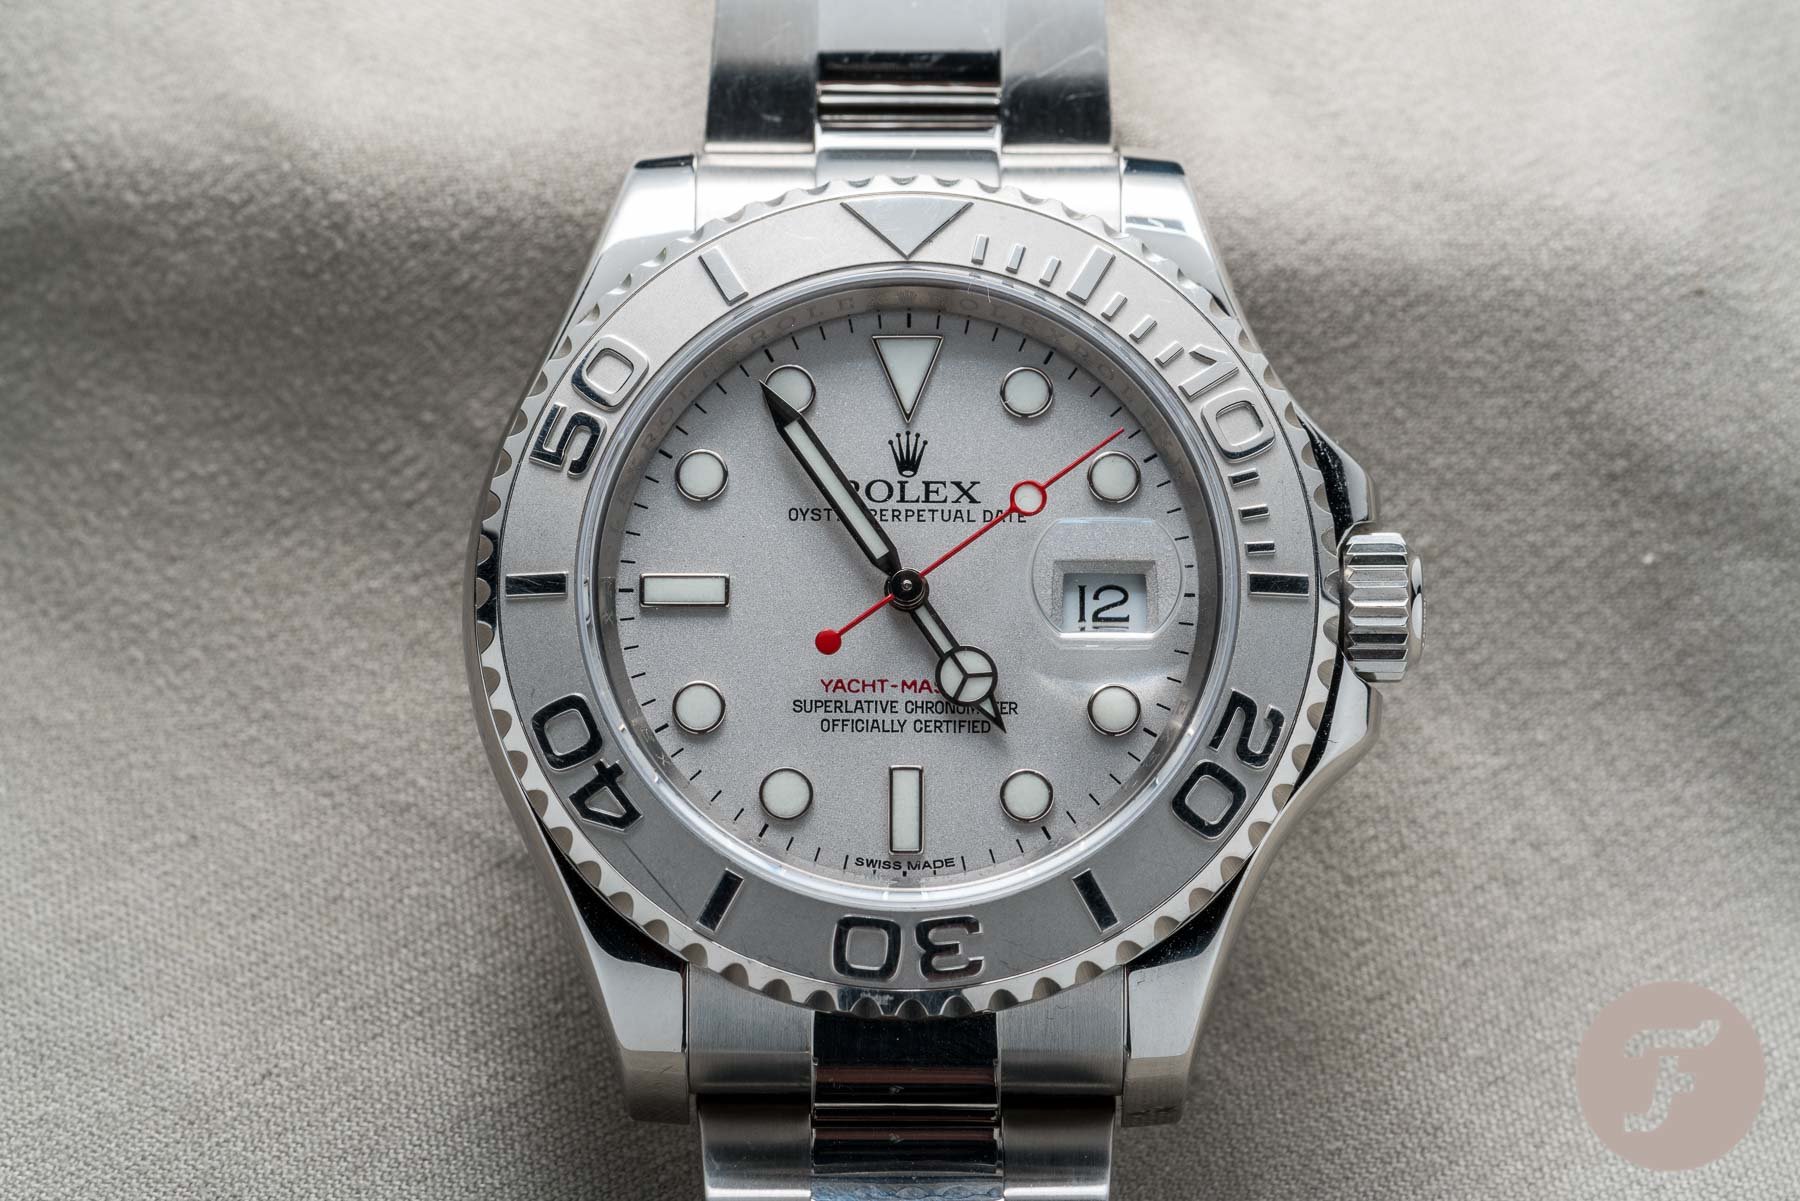 Why I Bought The Rolex Yacht-Master 16622 (Again)